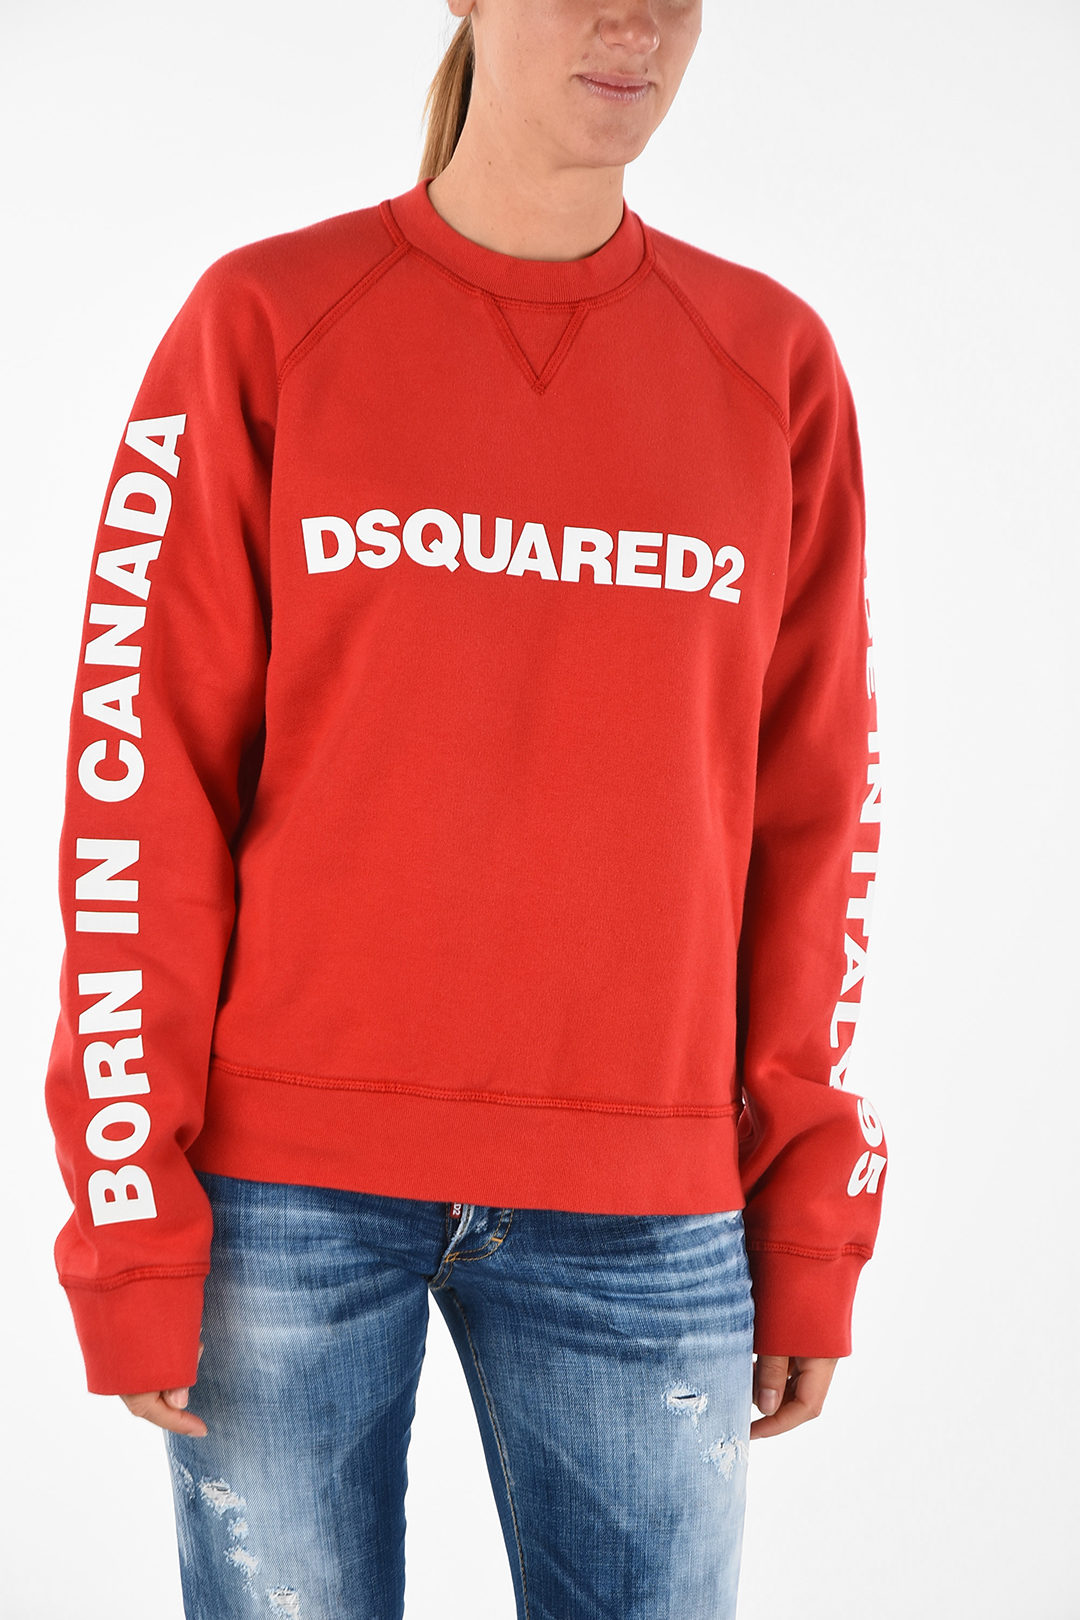 dsquared2 outlet canada